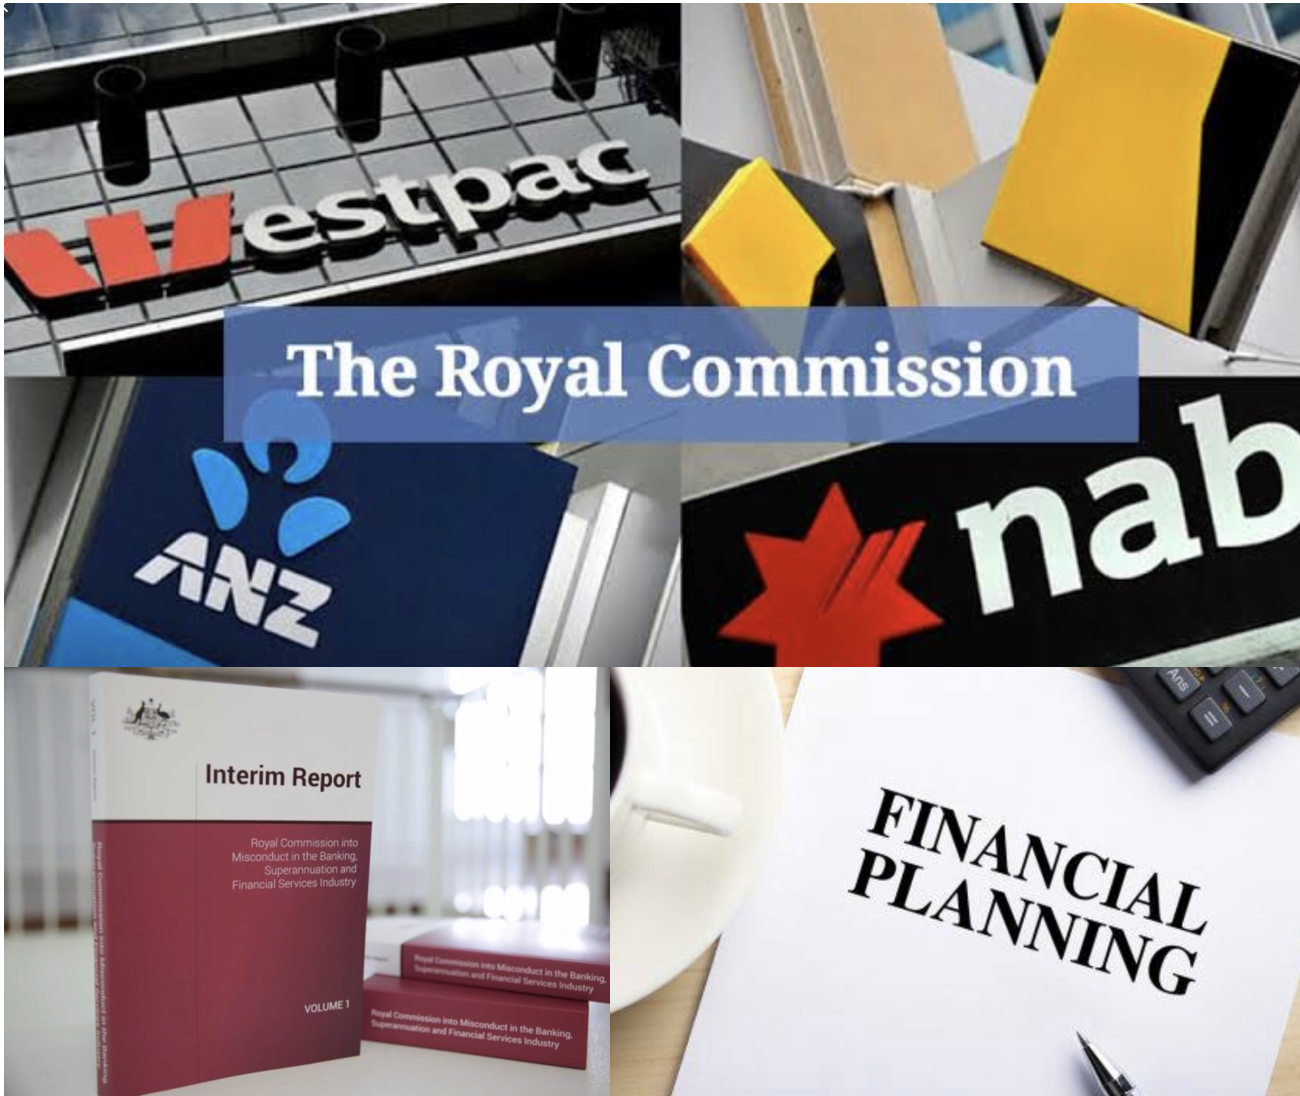 Royal Commission into Financial Planning